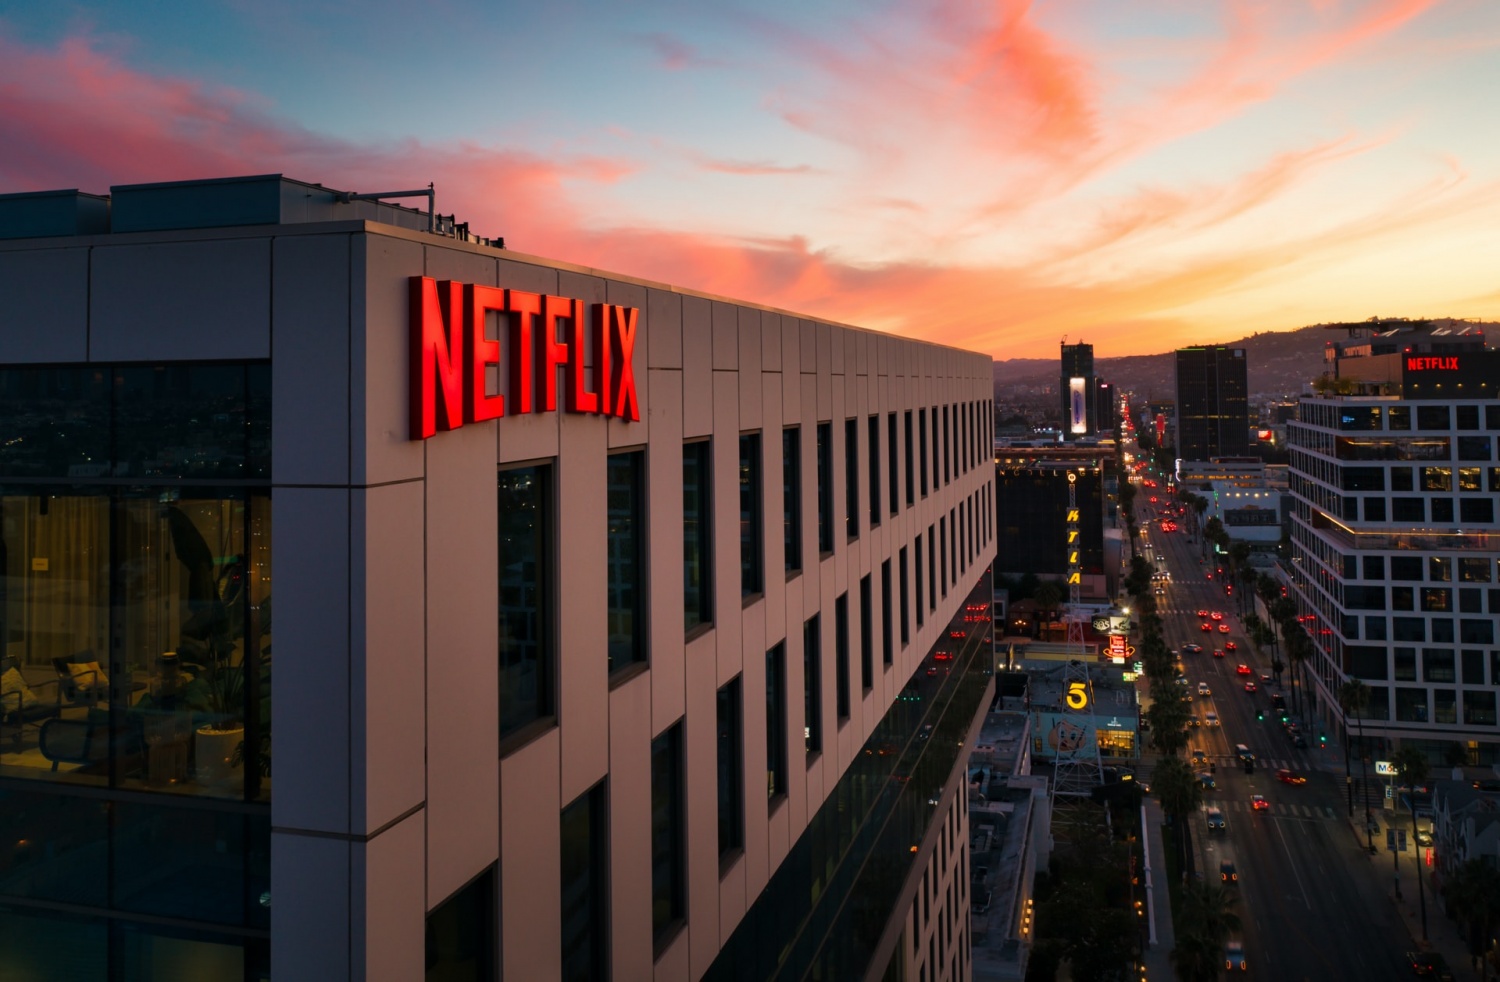 netflix-ad-supported-cheaper-plan-release-date-password-sharing-crackdown-to-come-sooner